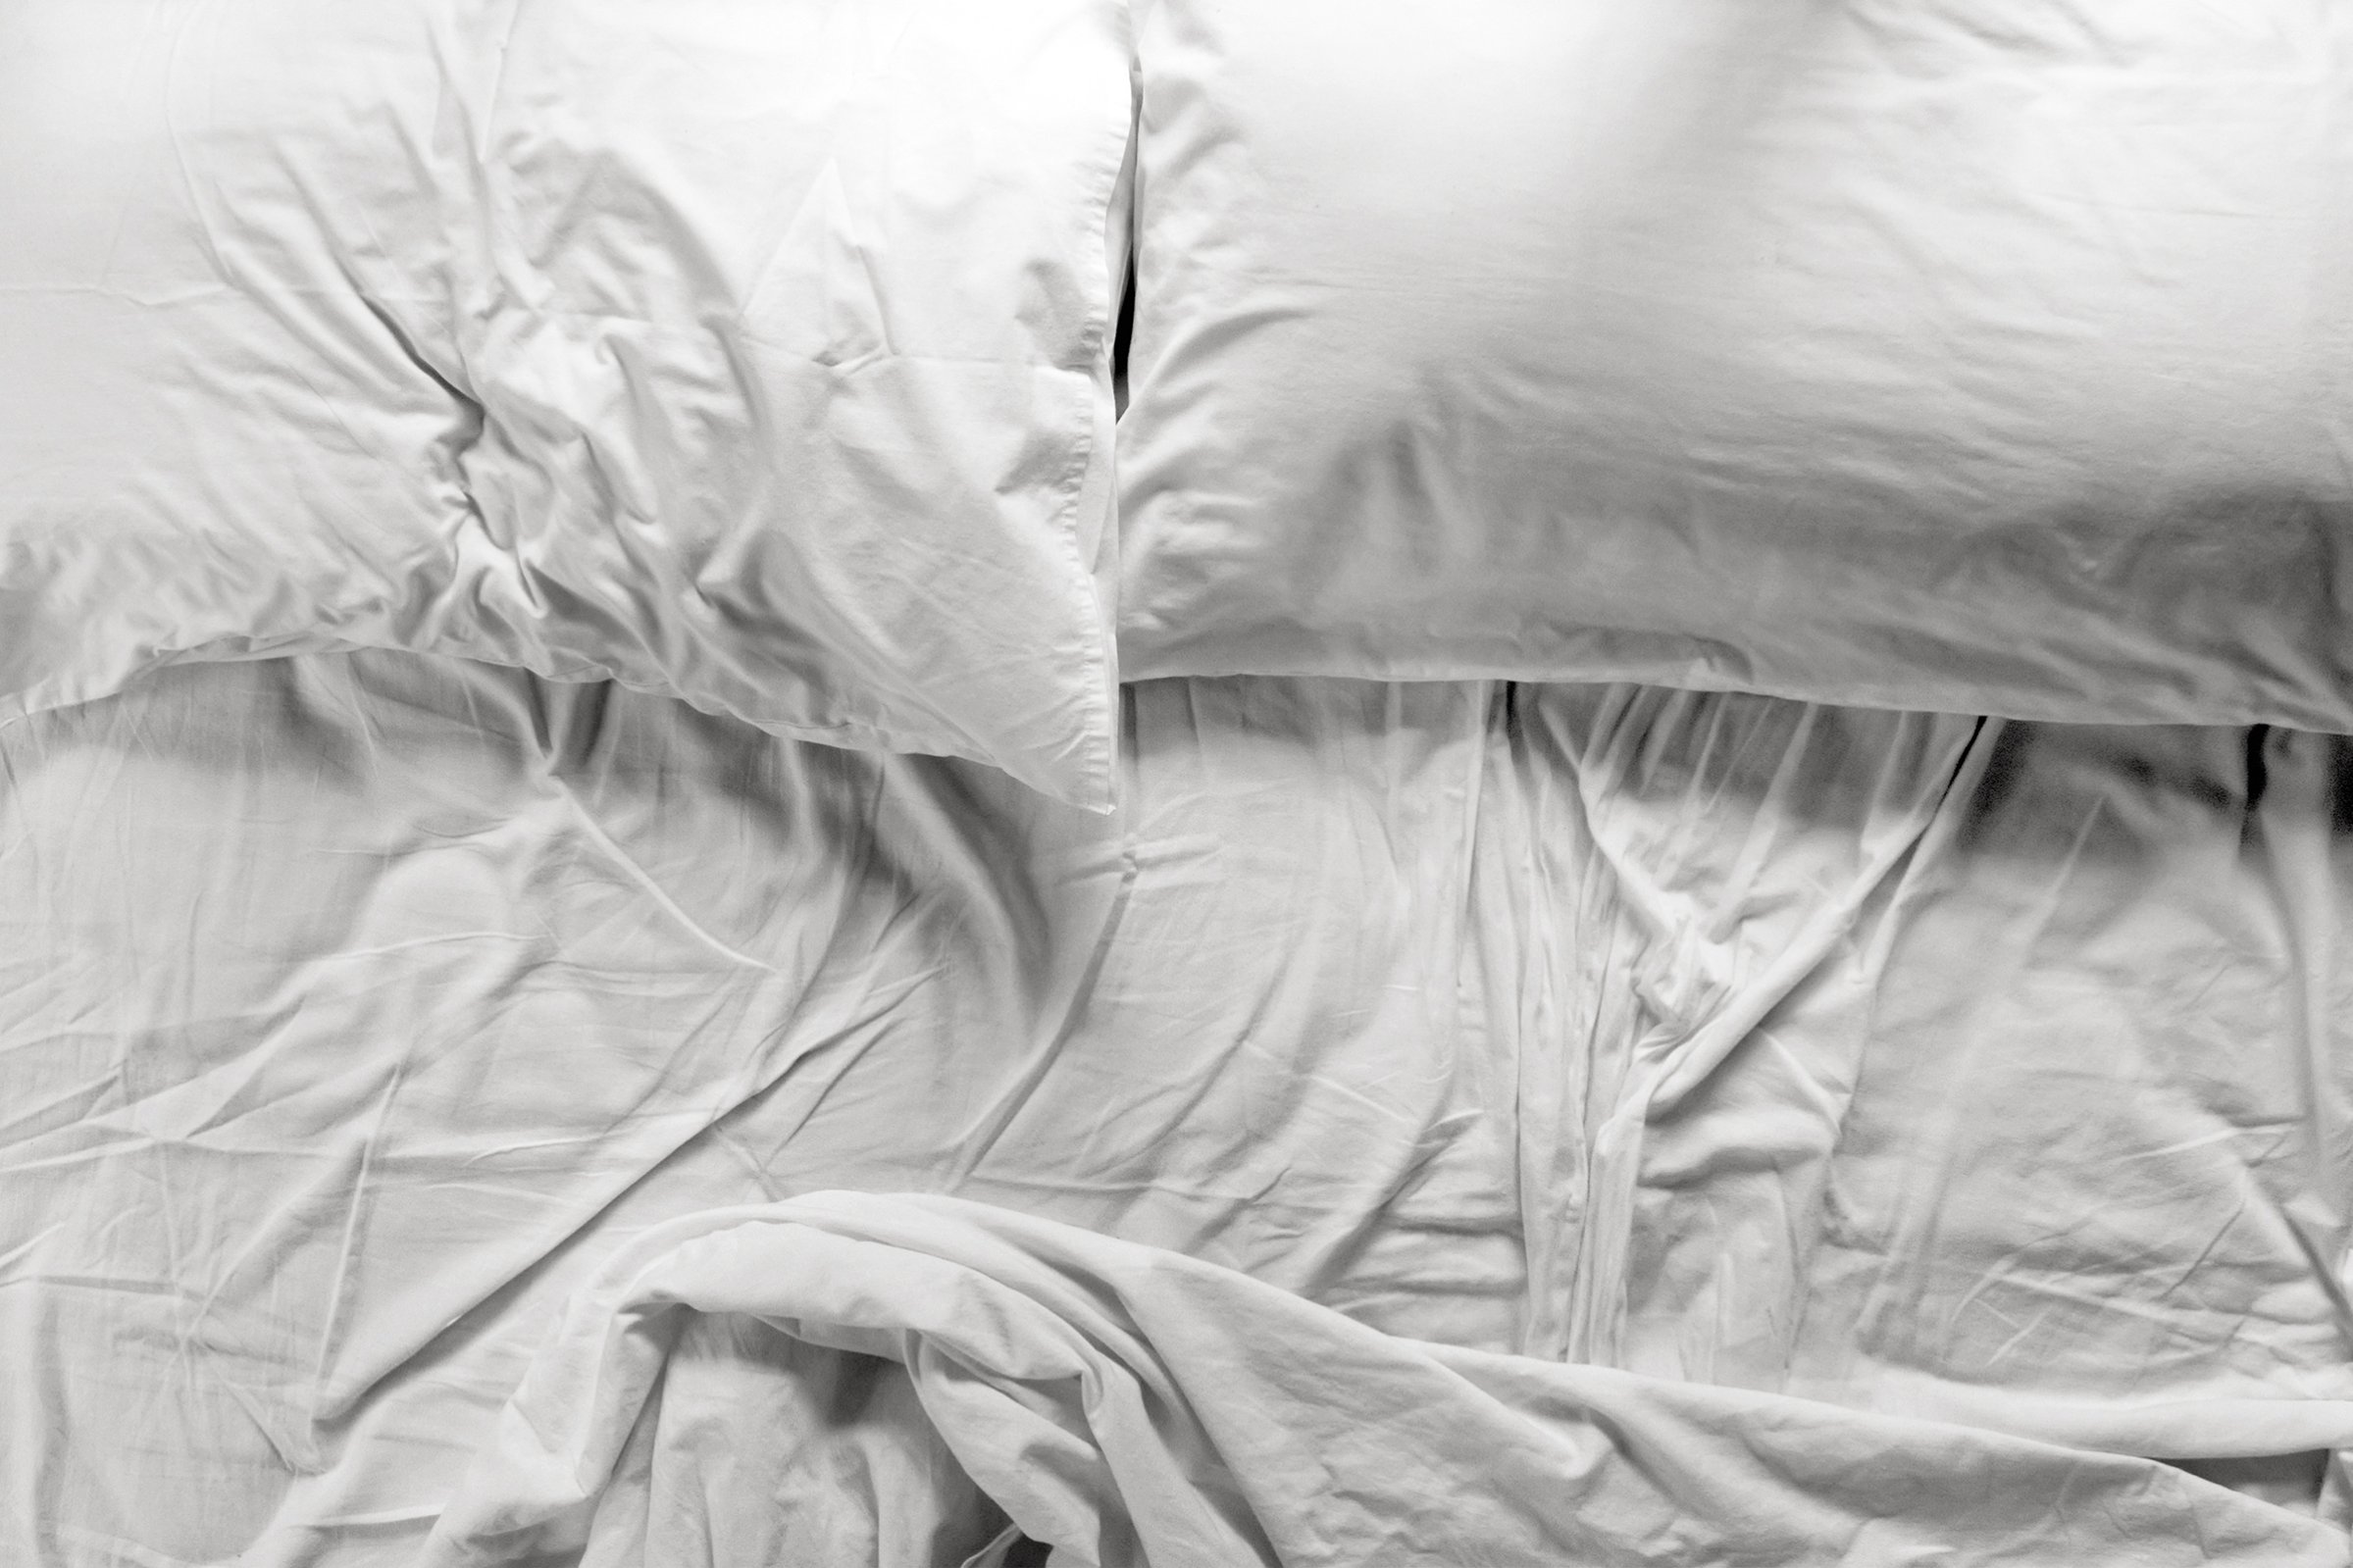 Unmade bed in a bedroom with two pillows and crumpled bed sheet